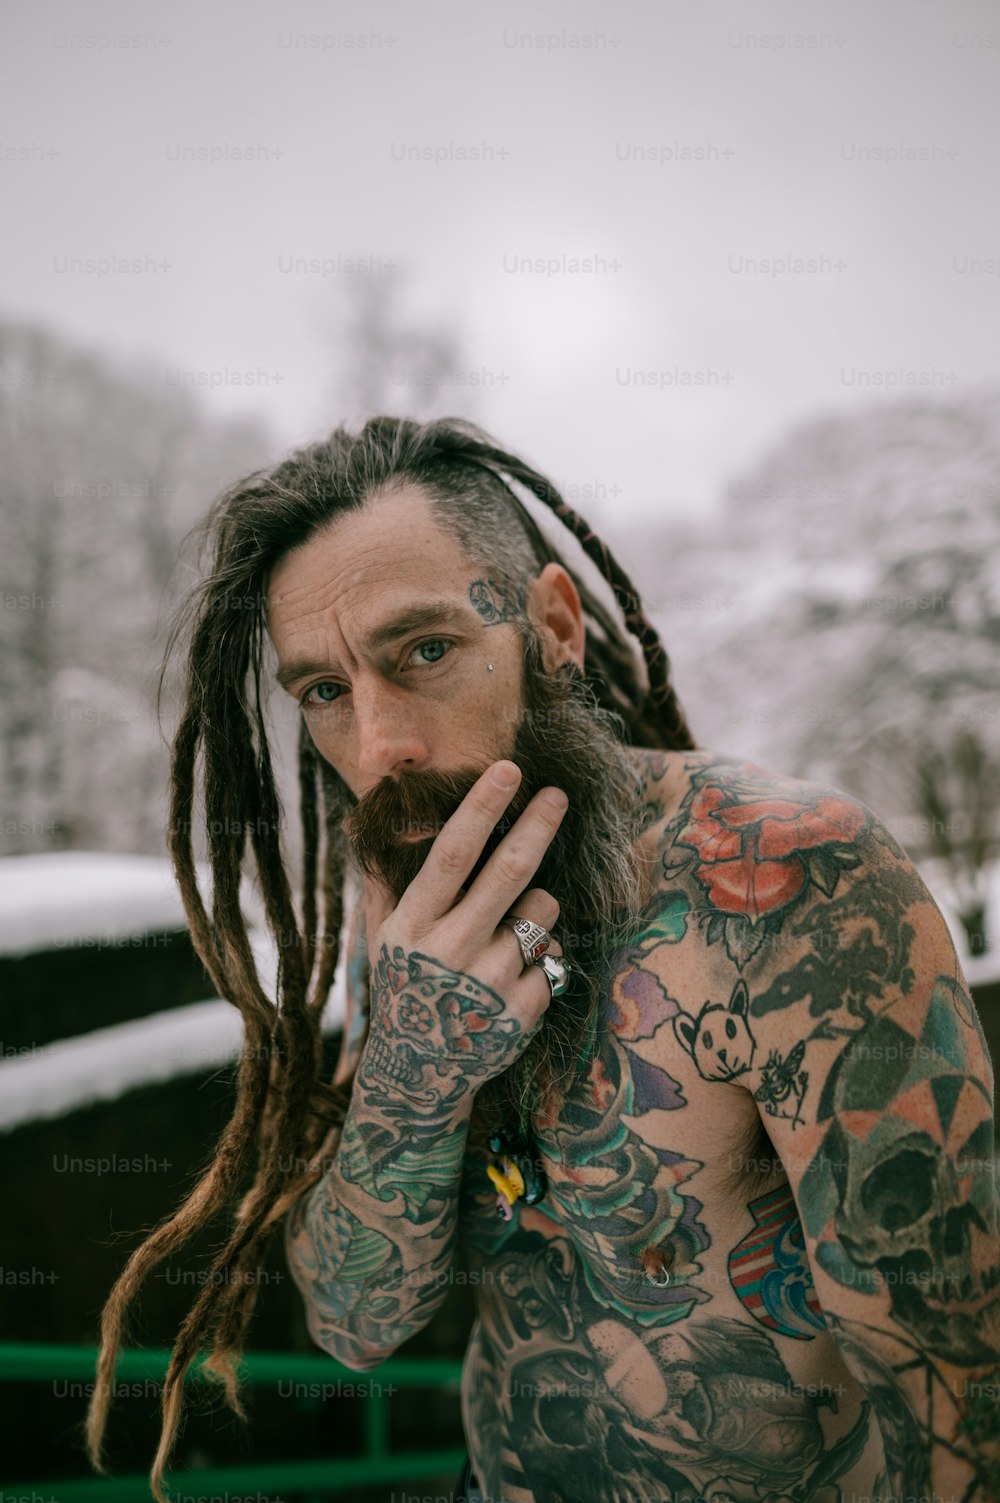 a man with long dreadlocks and tattoos on his face